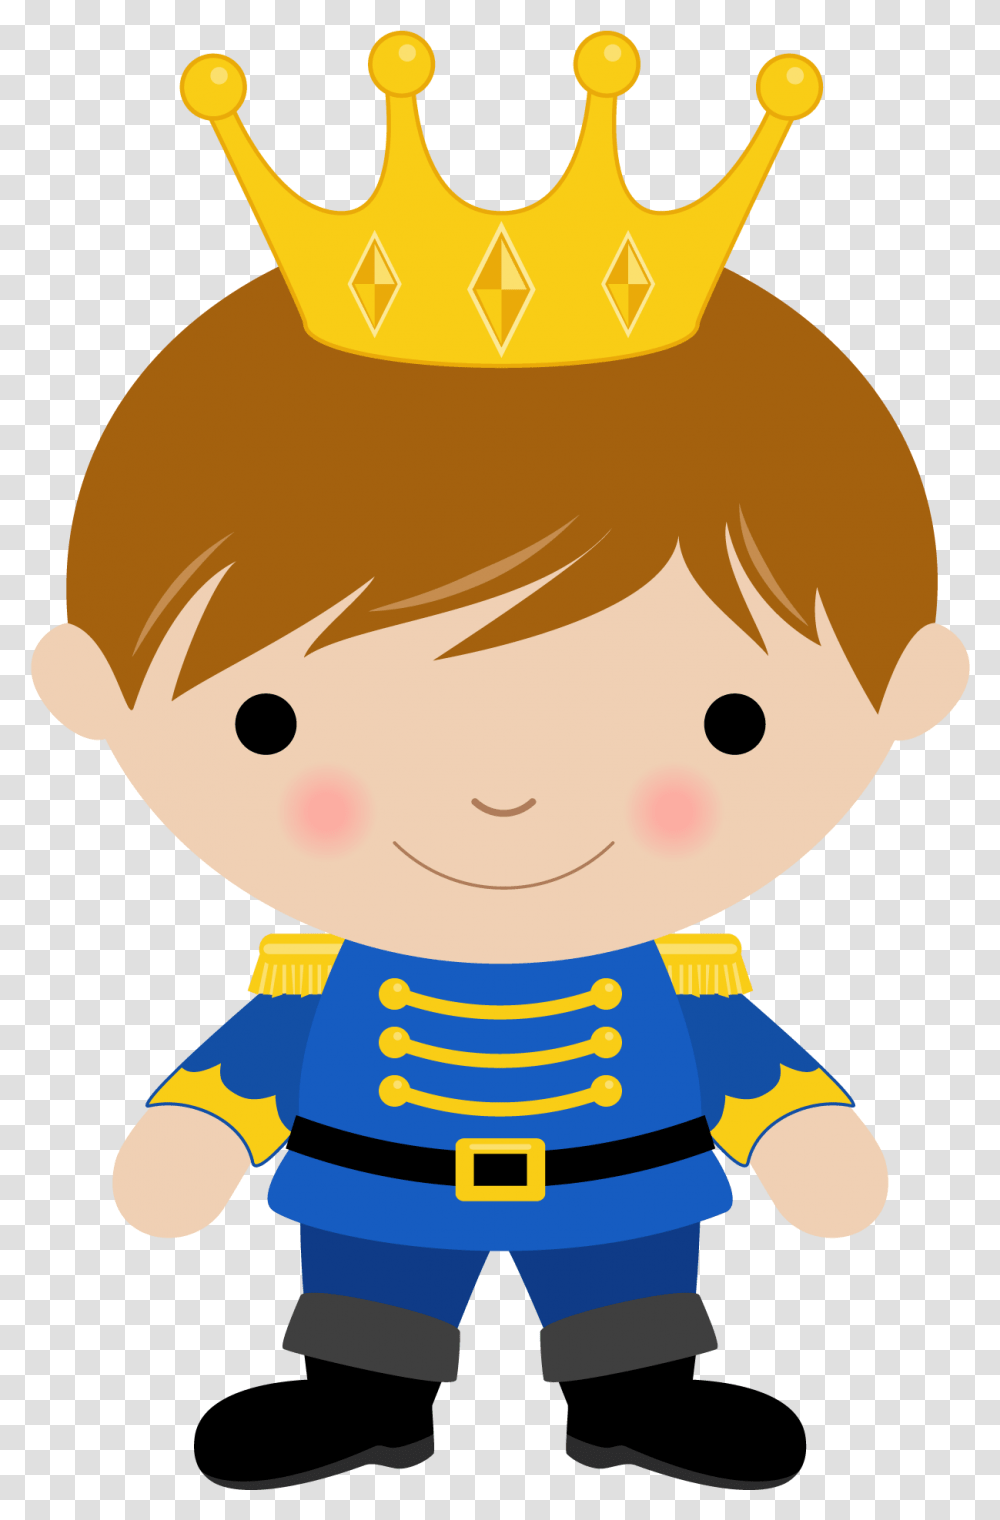 Printable Crafts Printables Prince Clipart Little Prince, Toy, Doll, Plush, Fireman Transparent Png